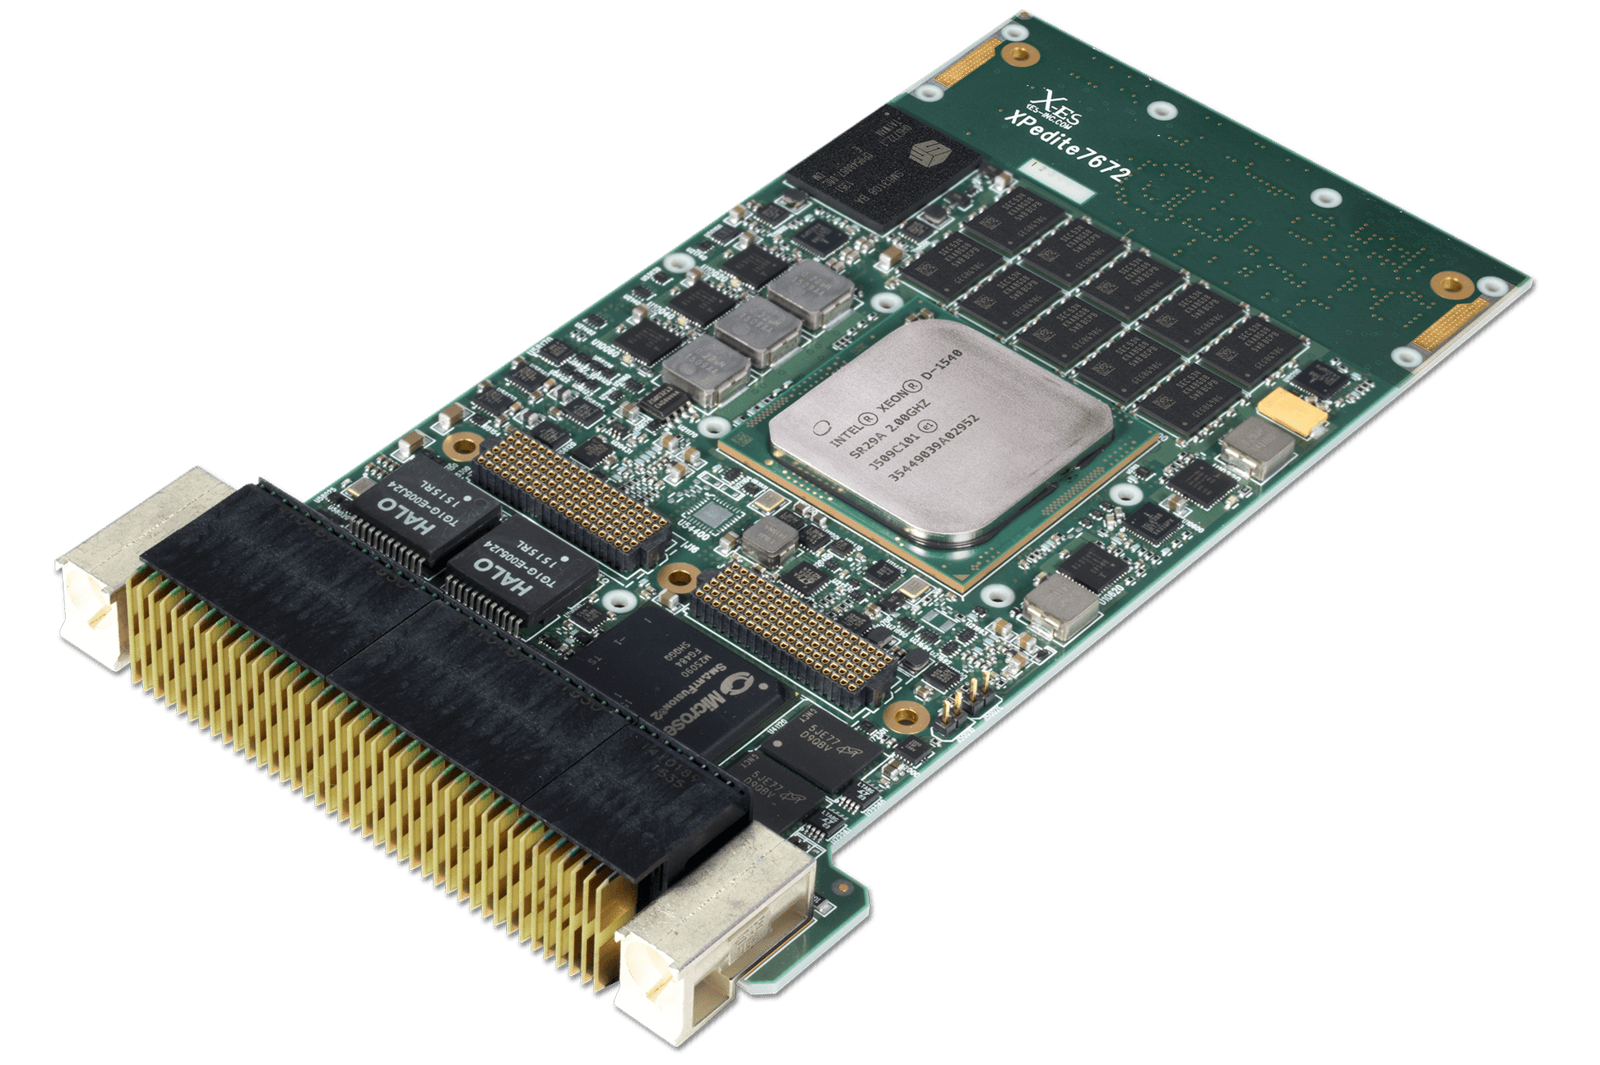 Single Board Computer or System on Module? Choosing the Right Computing Platform for an Embedded Application